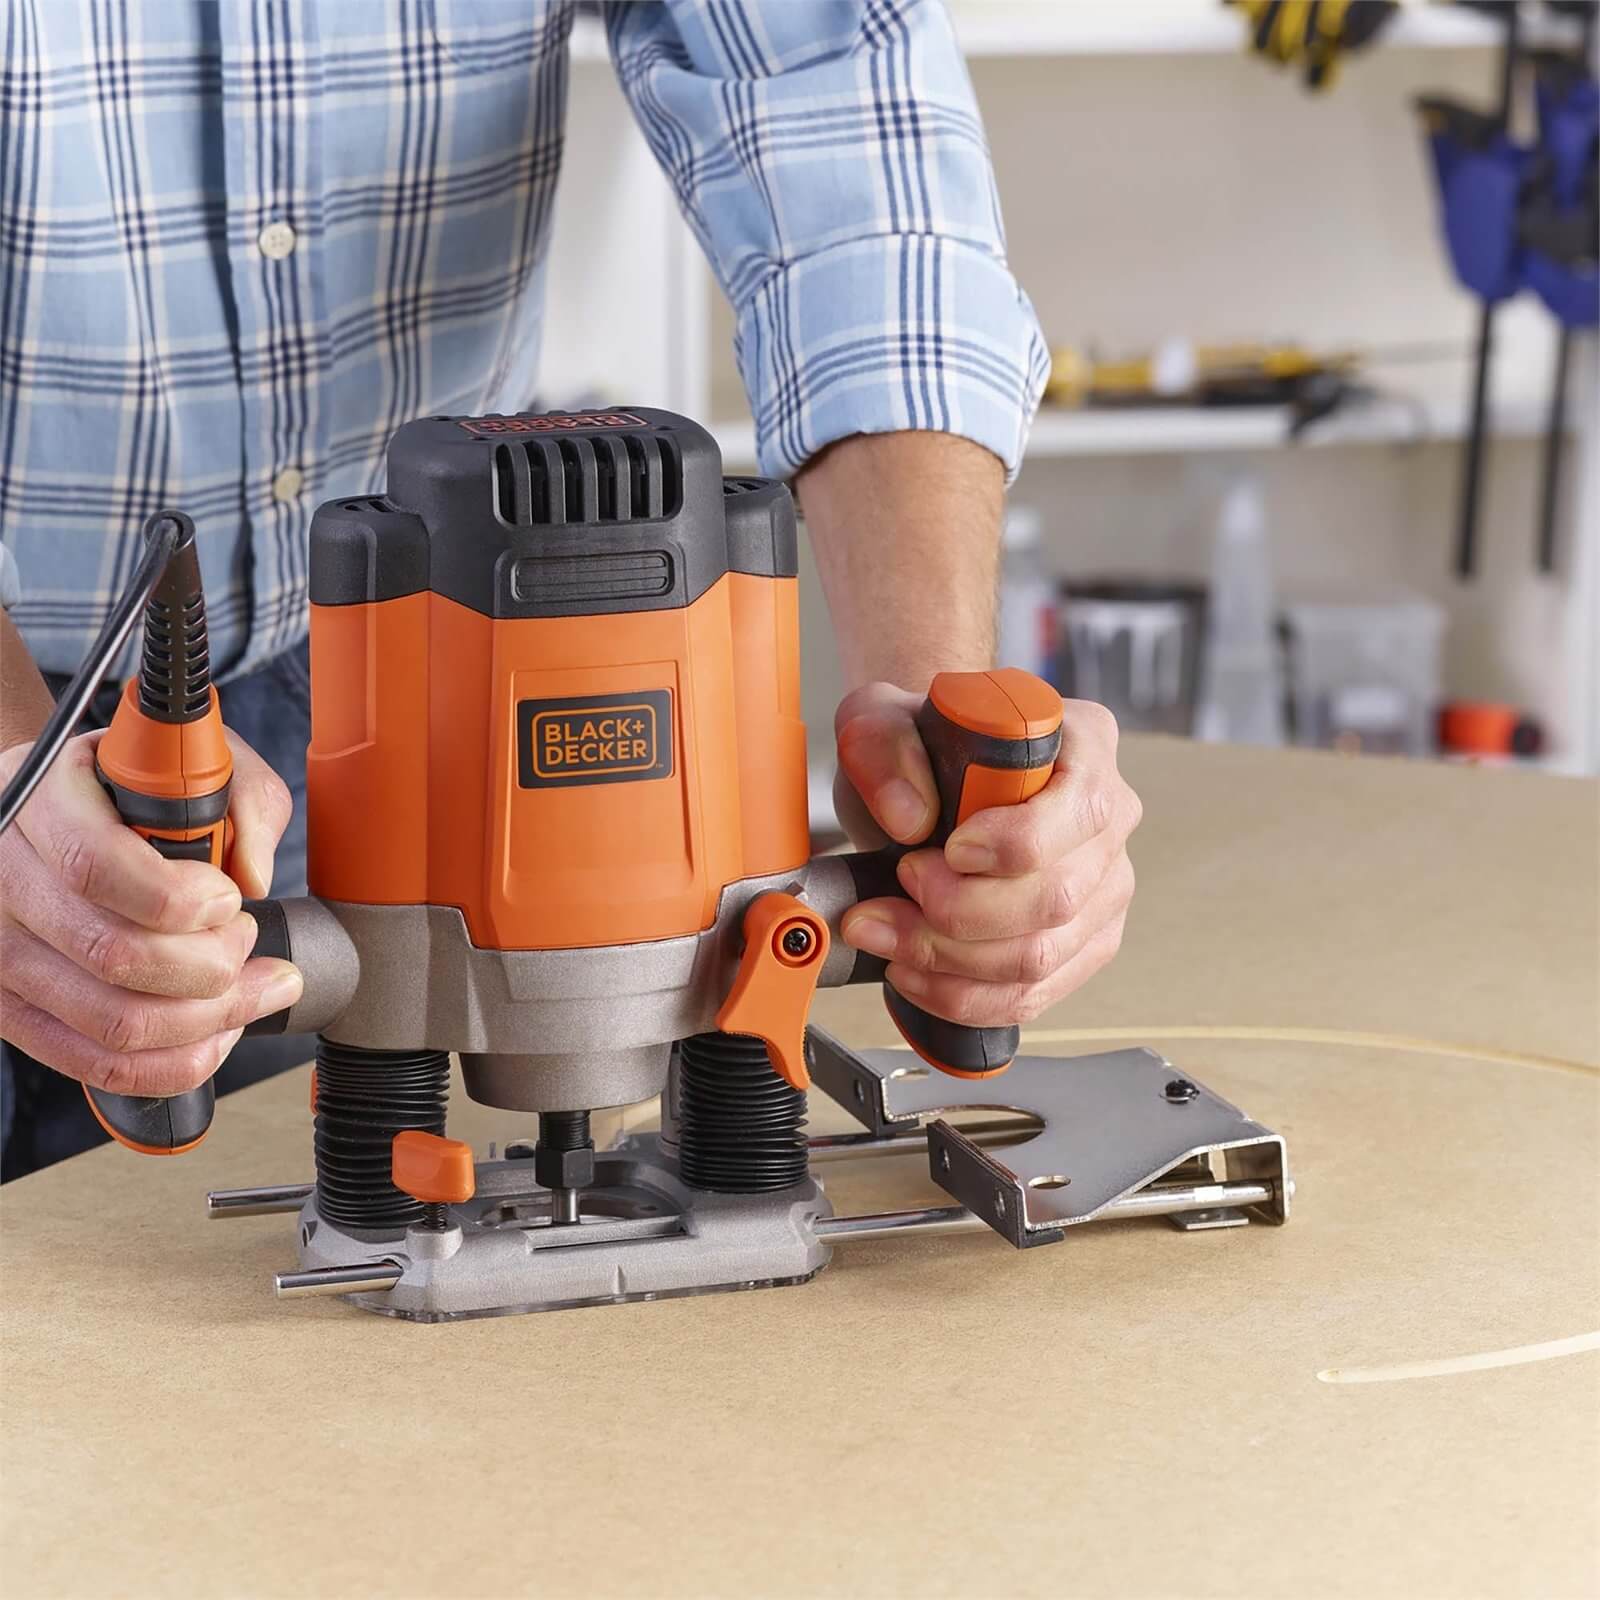 BLACK+DECKER 6.35mm 1200W Corded Plunge Router with Accessories (KW1200EKA-GB)